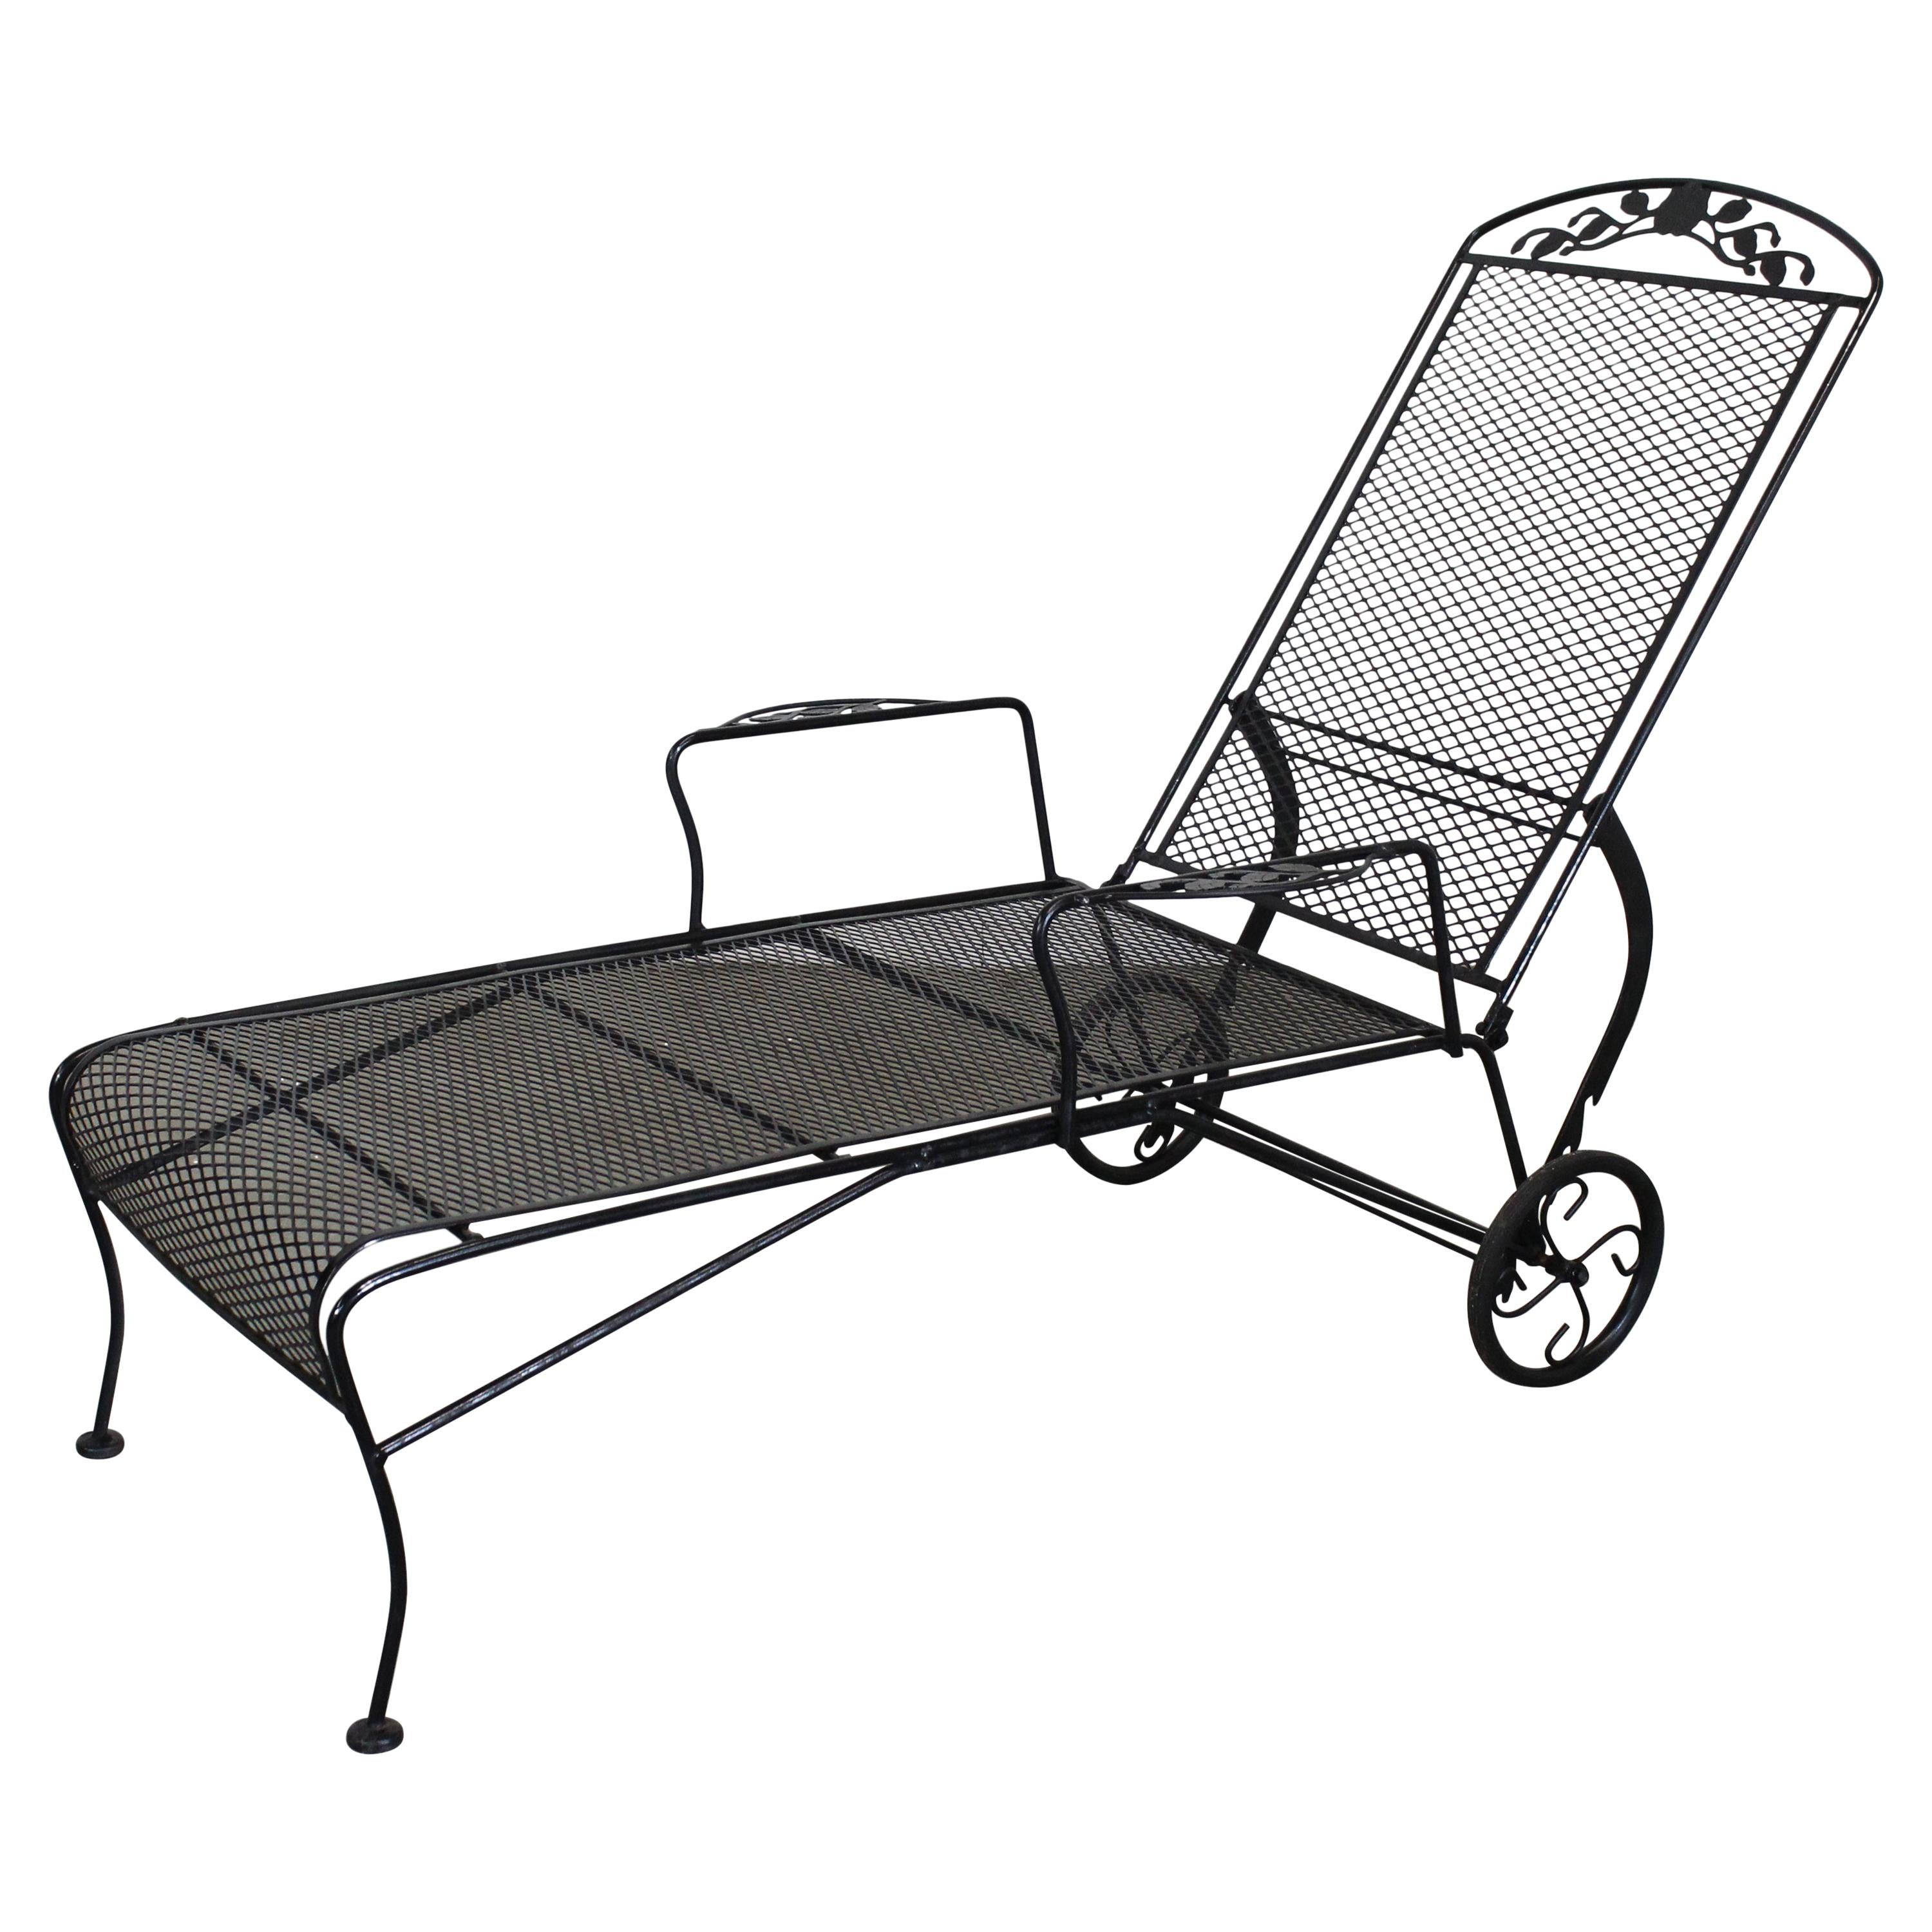 Floral Woodard Style Outdoor Chaise Lounge Chair